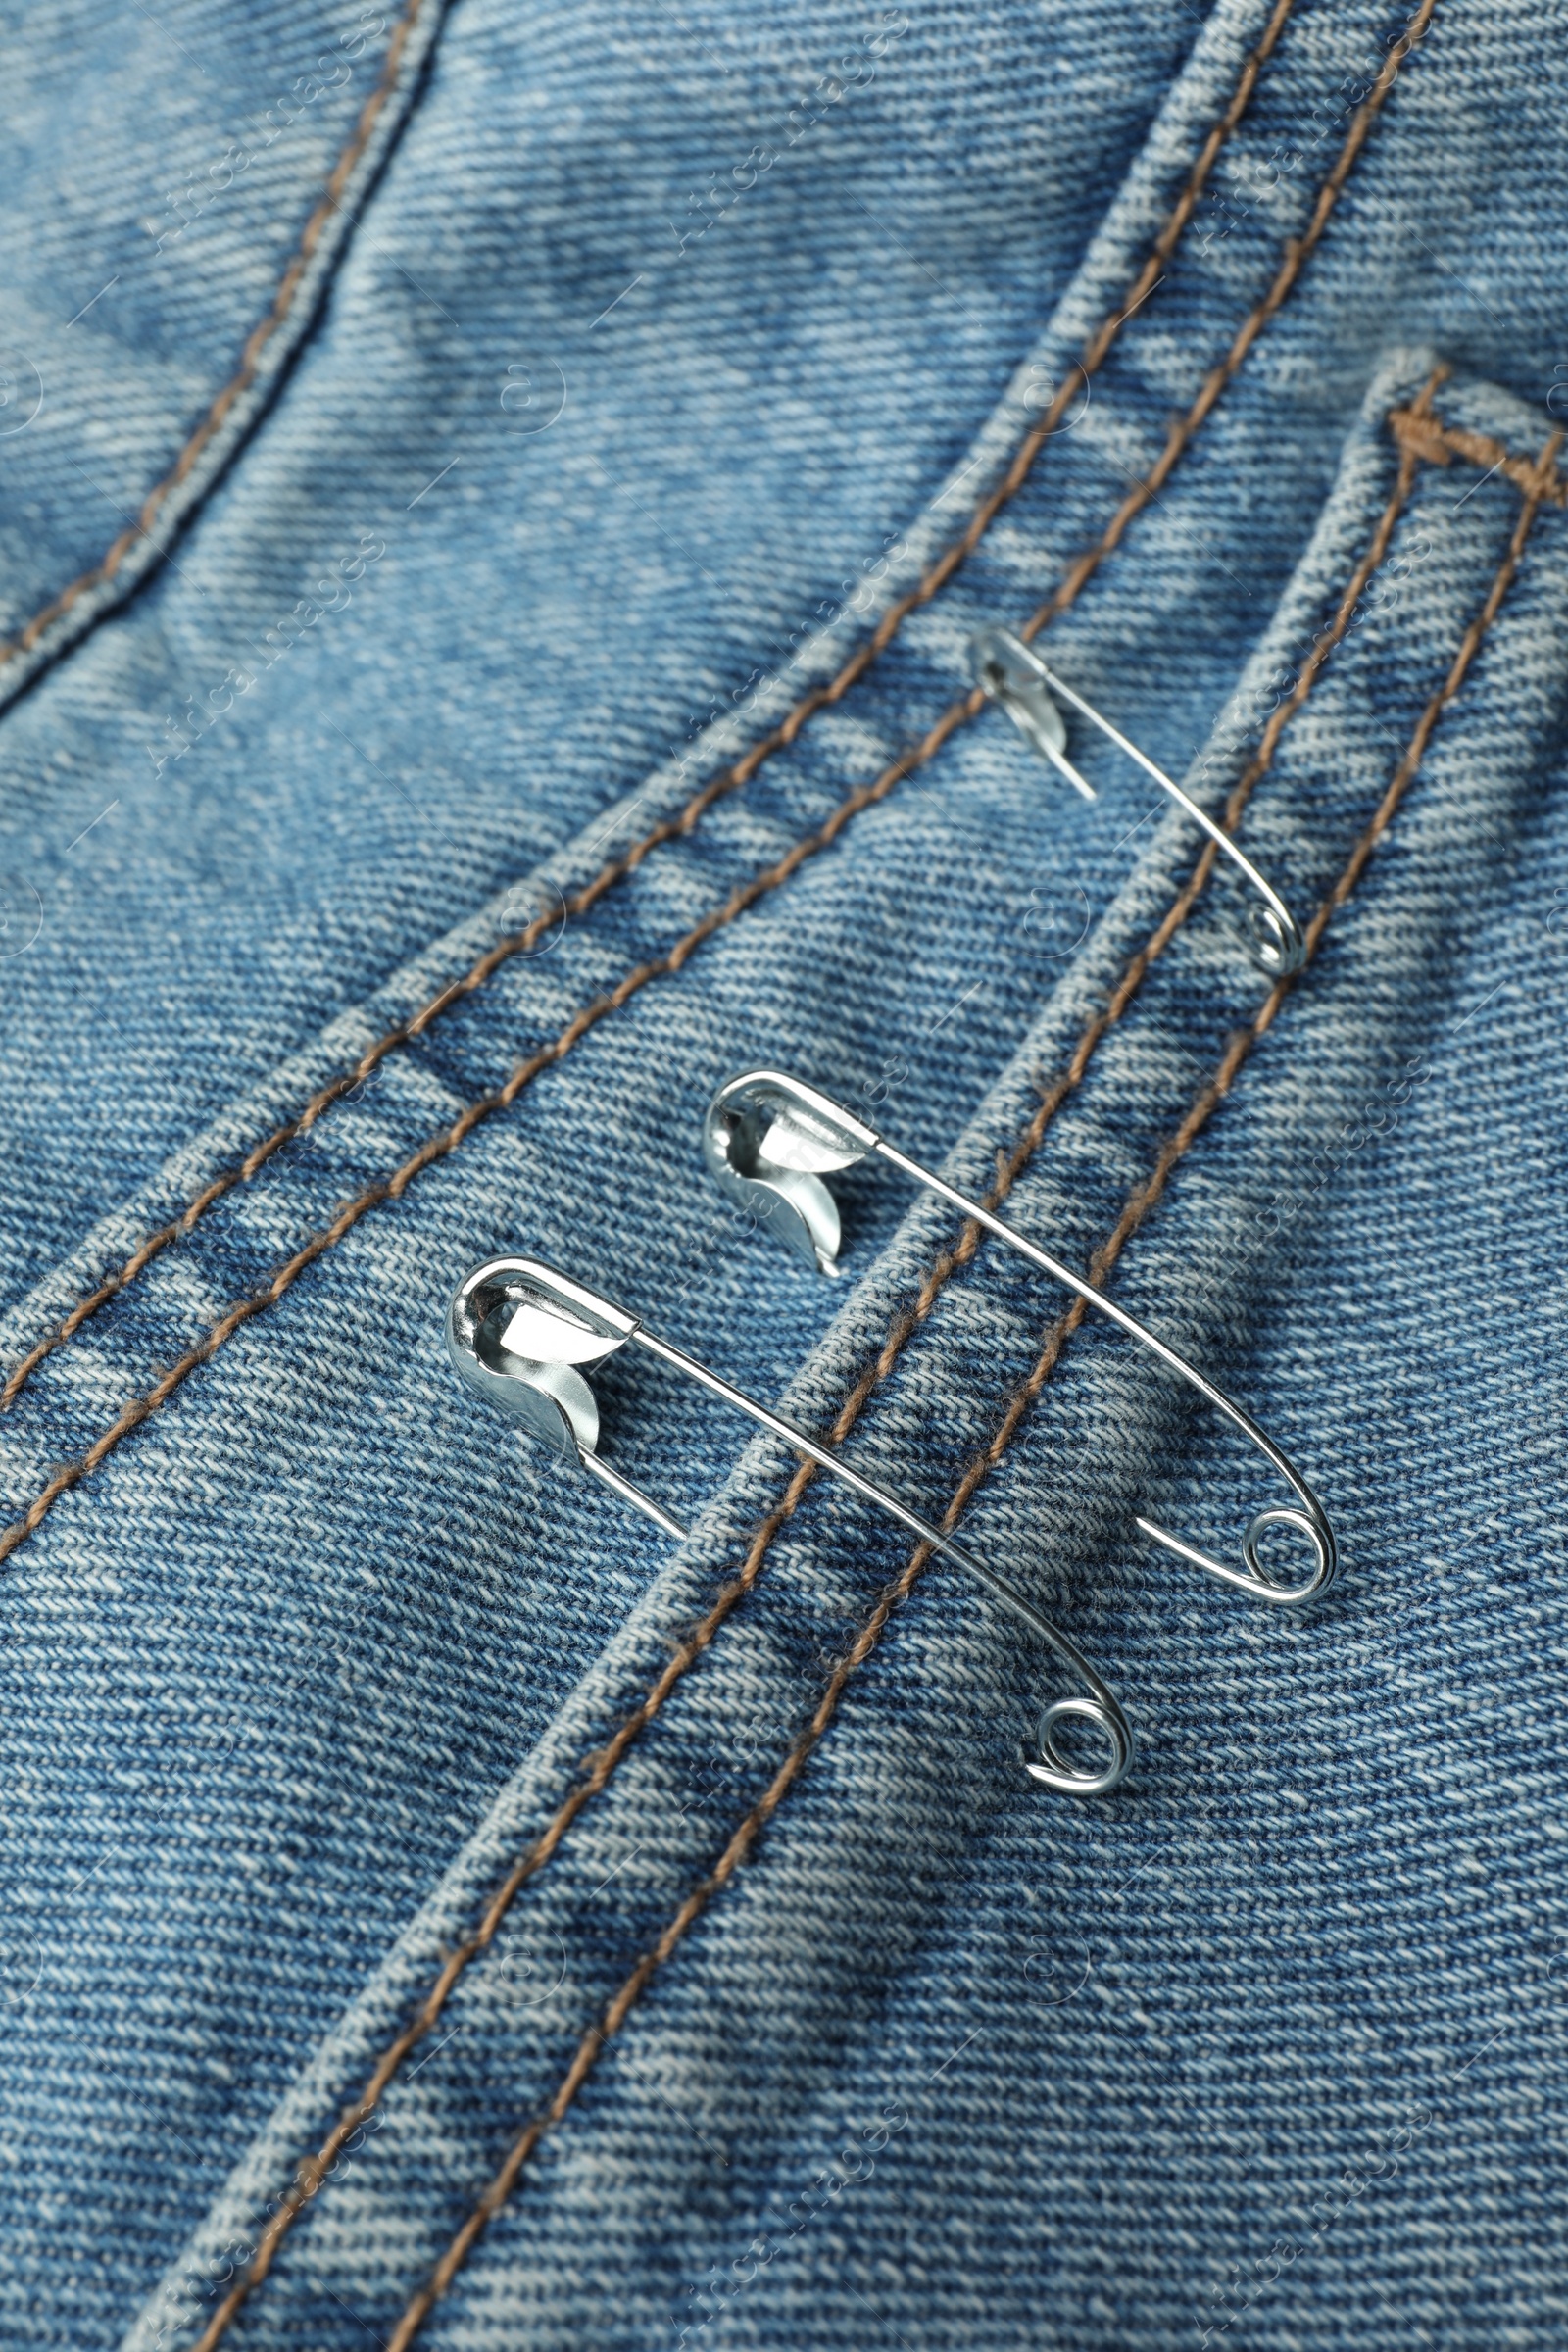 Photo of Closeup view of metal safety pins on clothing